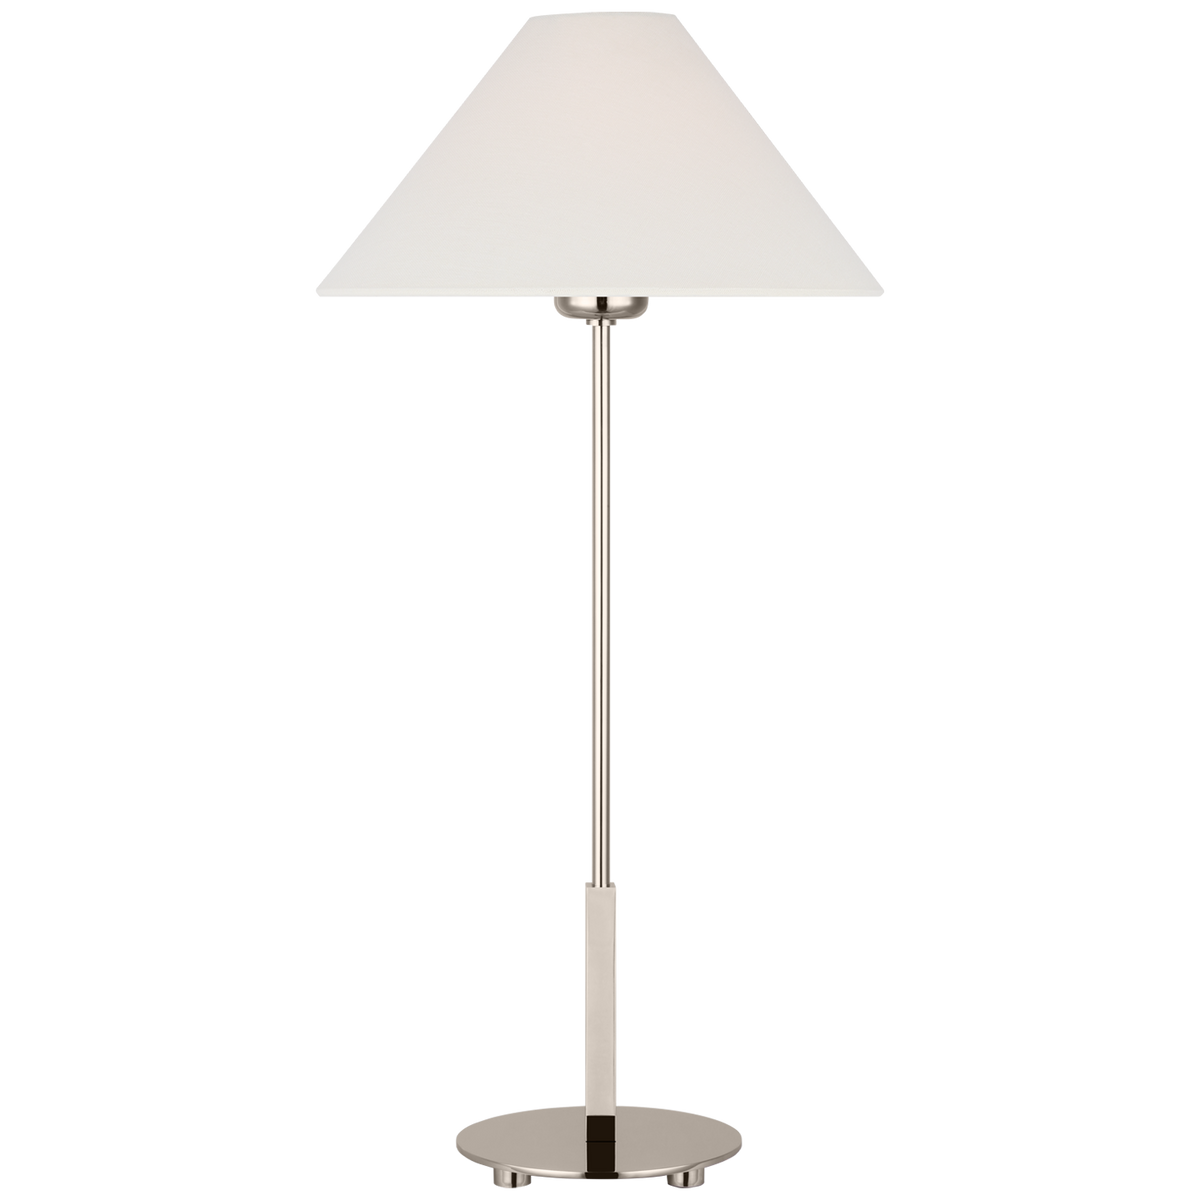 Hackney Cordless Accent Lamp 24 Inch - Polished Nickel